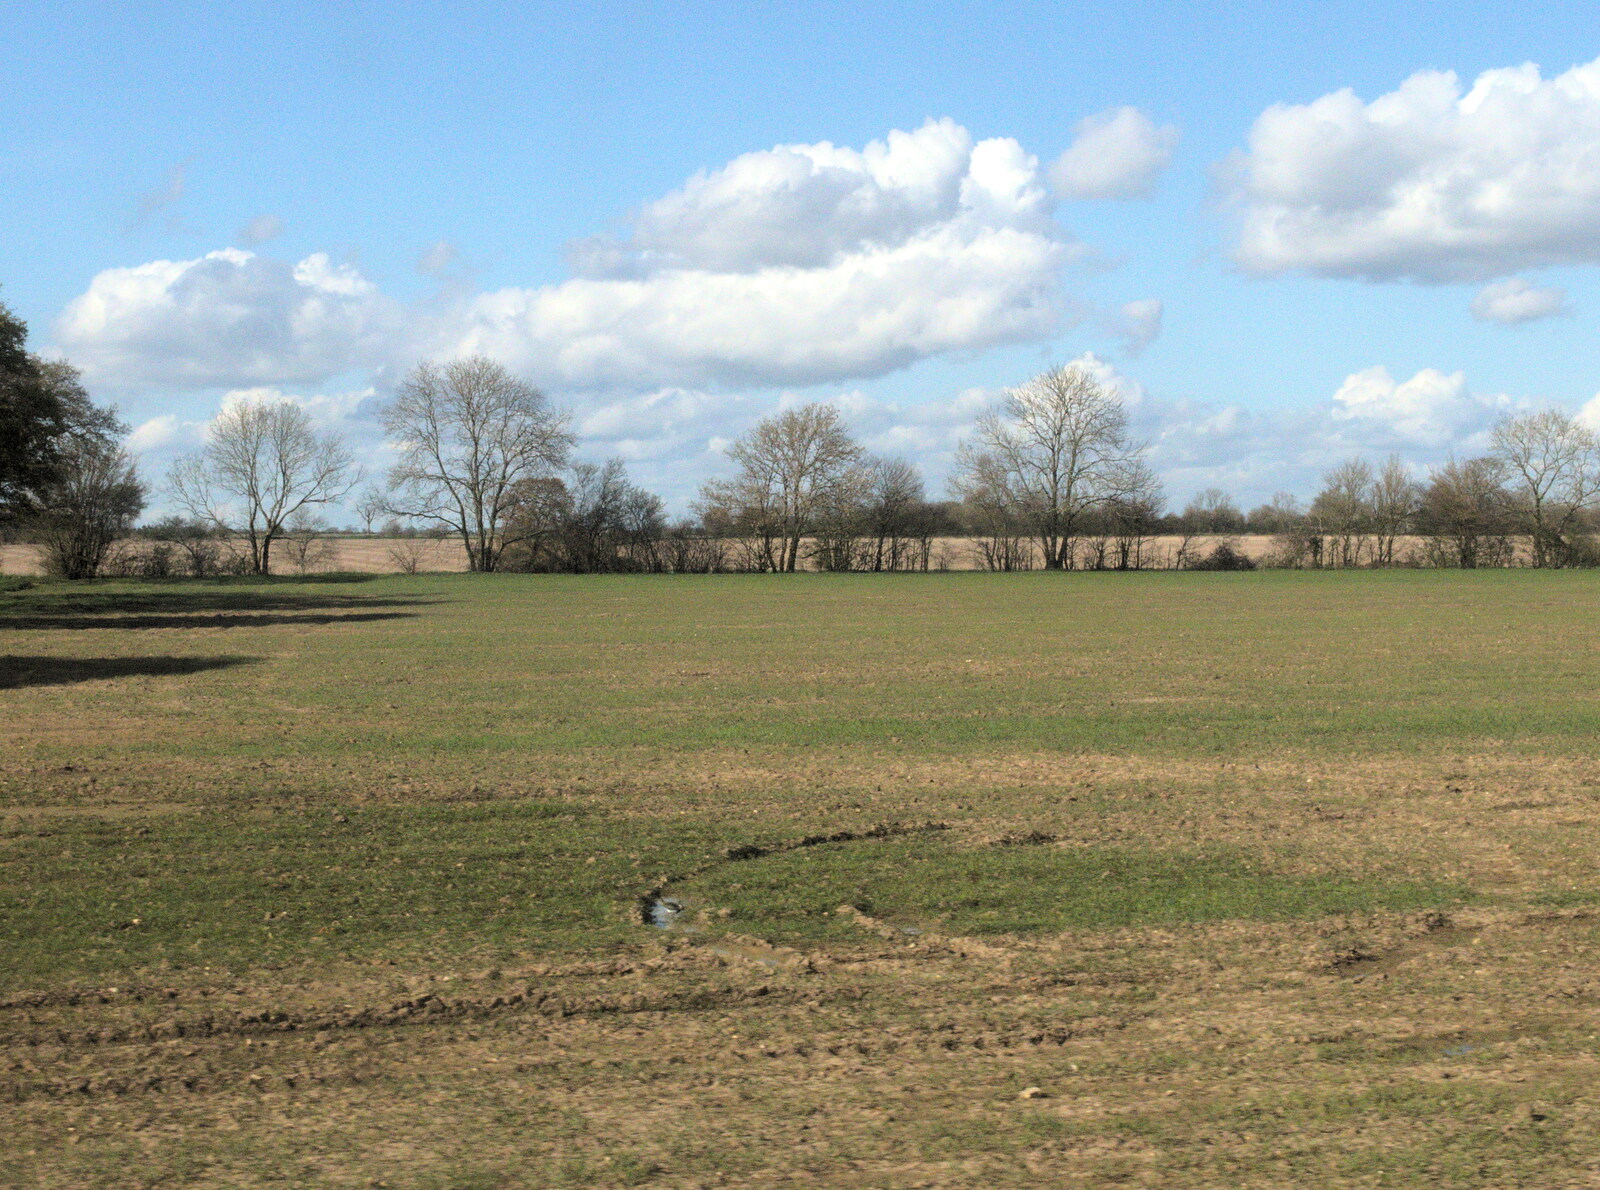 Fields near Wetherden from The East Anglian Beer Festival, Bury St Edmunds, Suffolk - 23rd April 2016